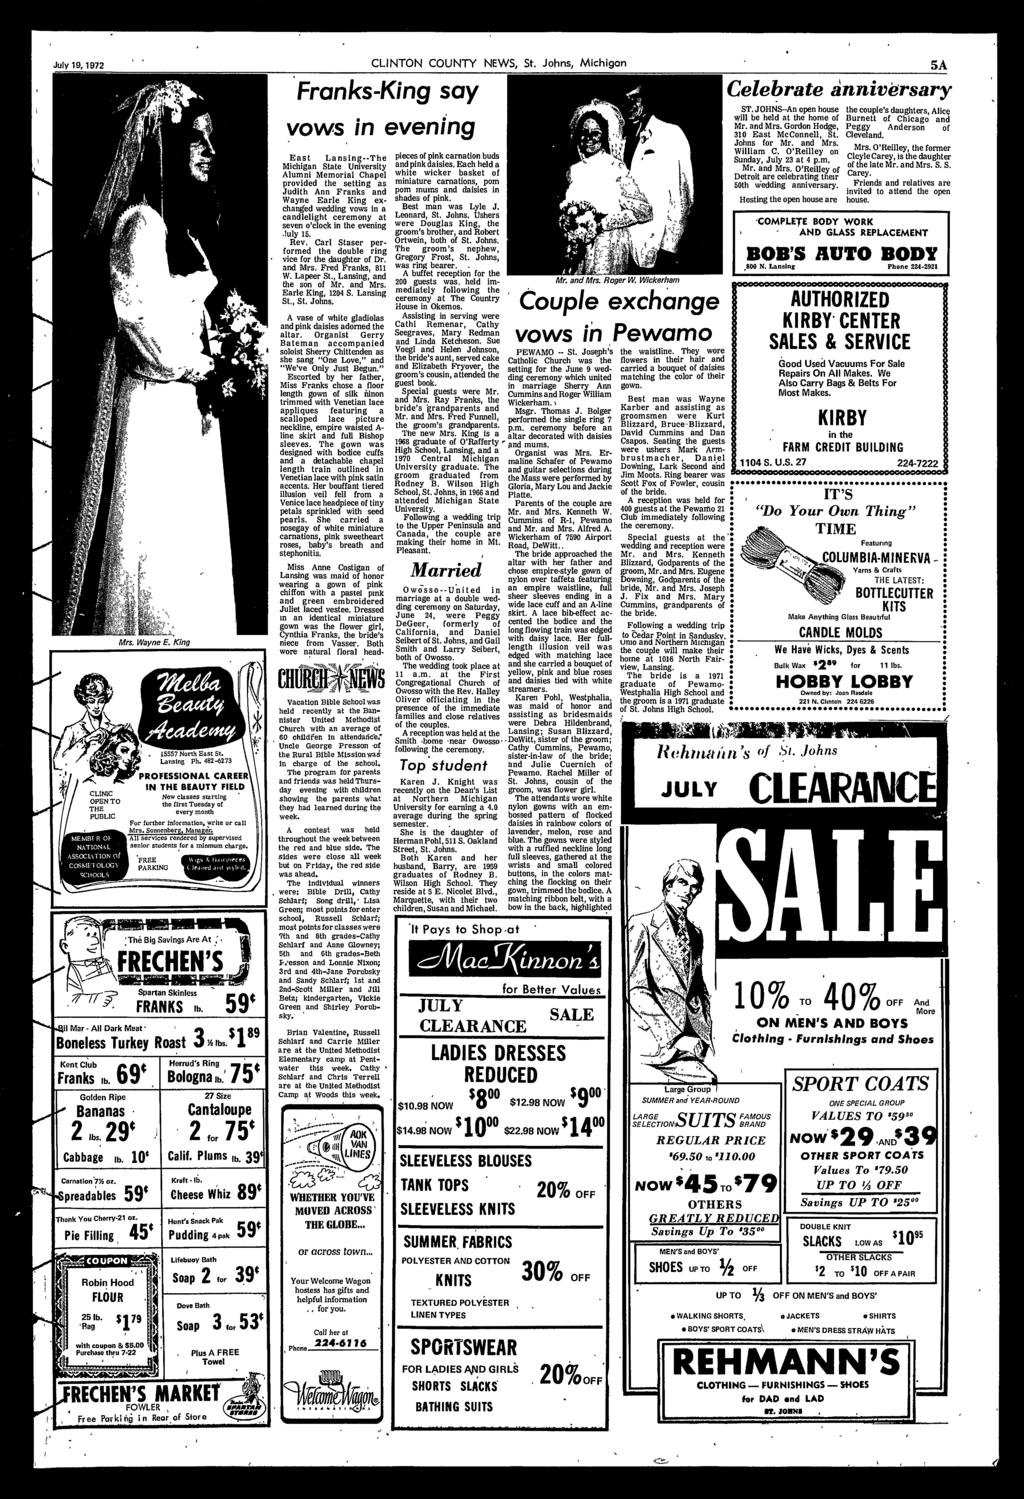 July 19,1972 CLINTON COUNTY NEWS, St, Johns, Mchgan 5A. x" CLINIC OPEN TO THE PUBLIC MEMBER Oh NATIONAL ASSOCIATION of COSMETOLOGY SCHOOLS,. wp*r* v I Mrs. Wayne. Kng, 155S7 North East St. Lansng Ph.